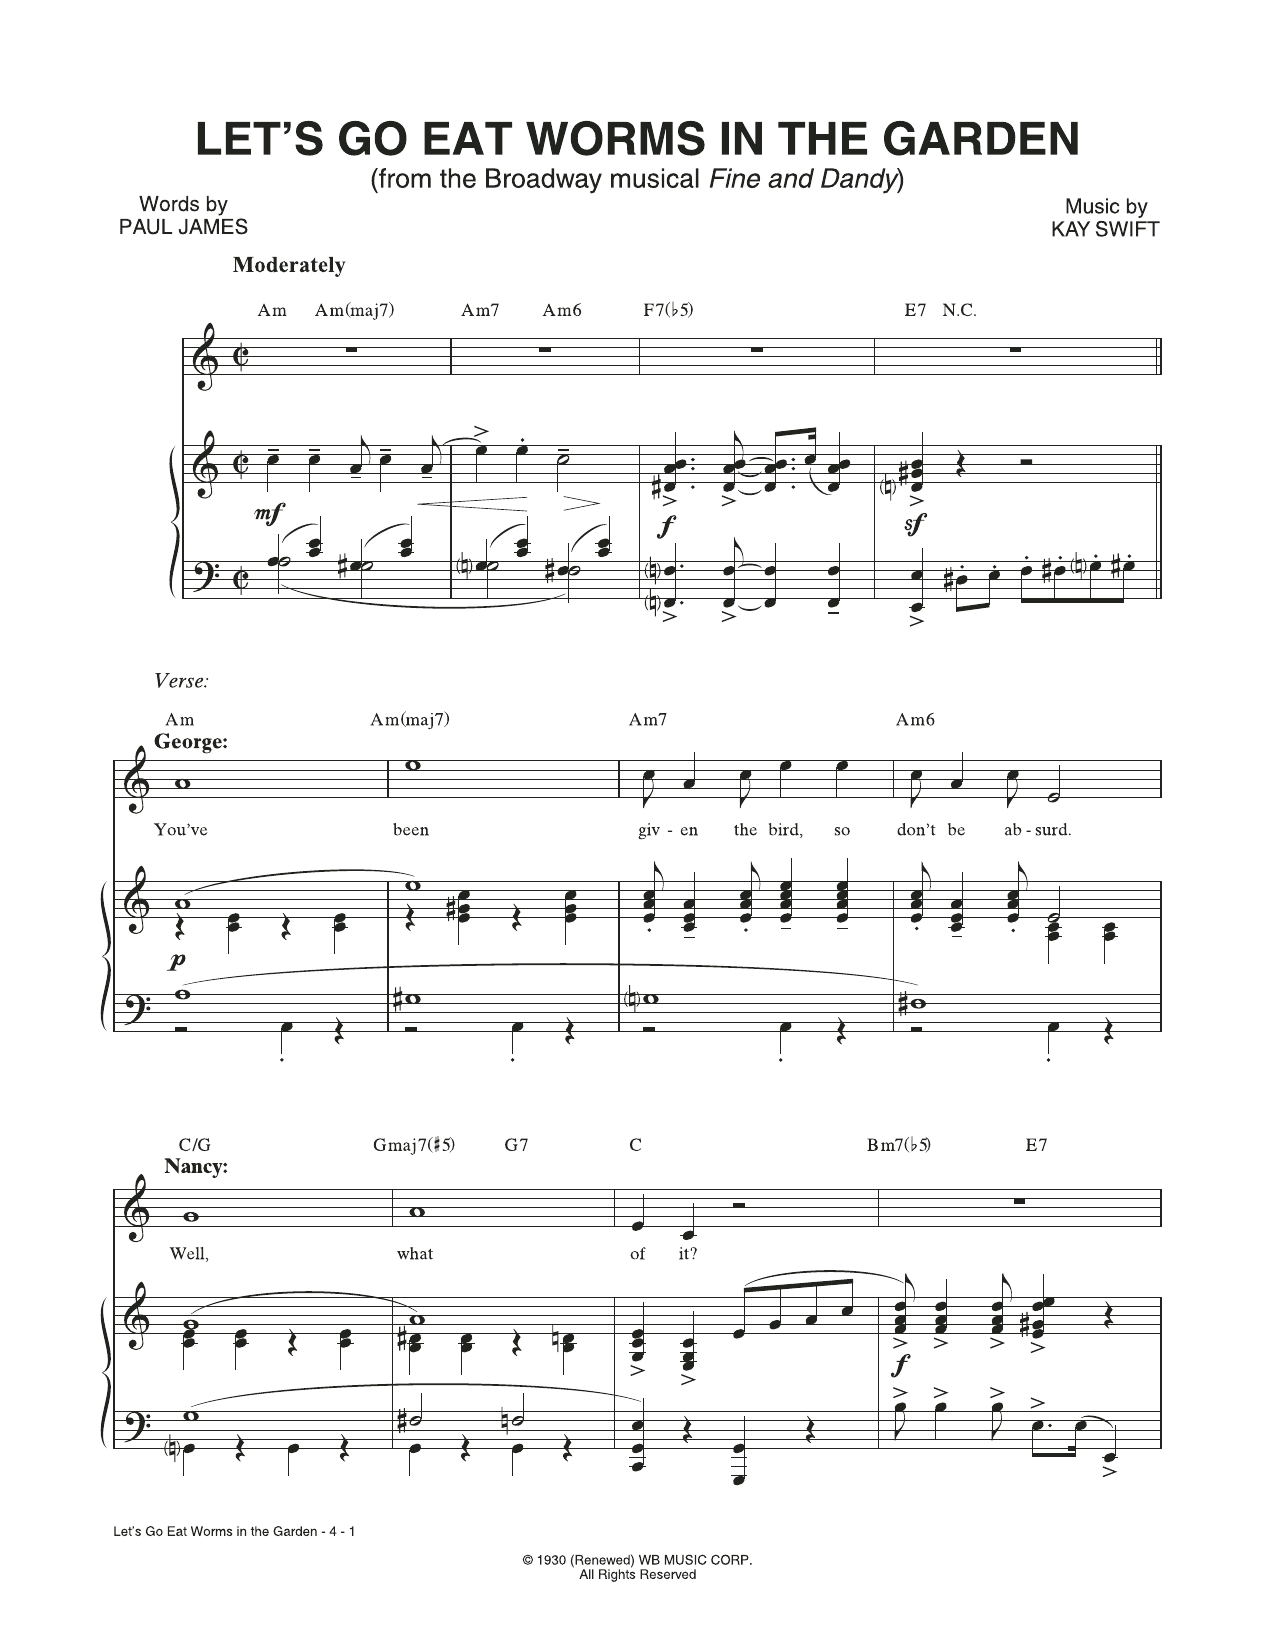 Download Kay Swift & Paul James Let's Go Eat Worms In The Garden (from Sheet Music